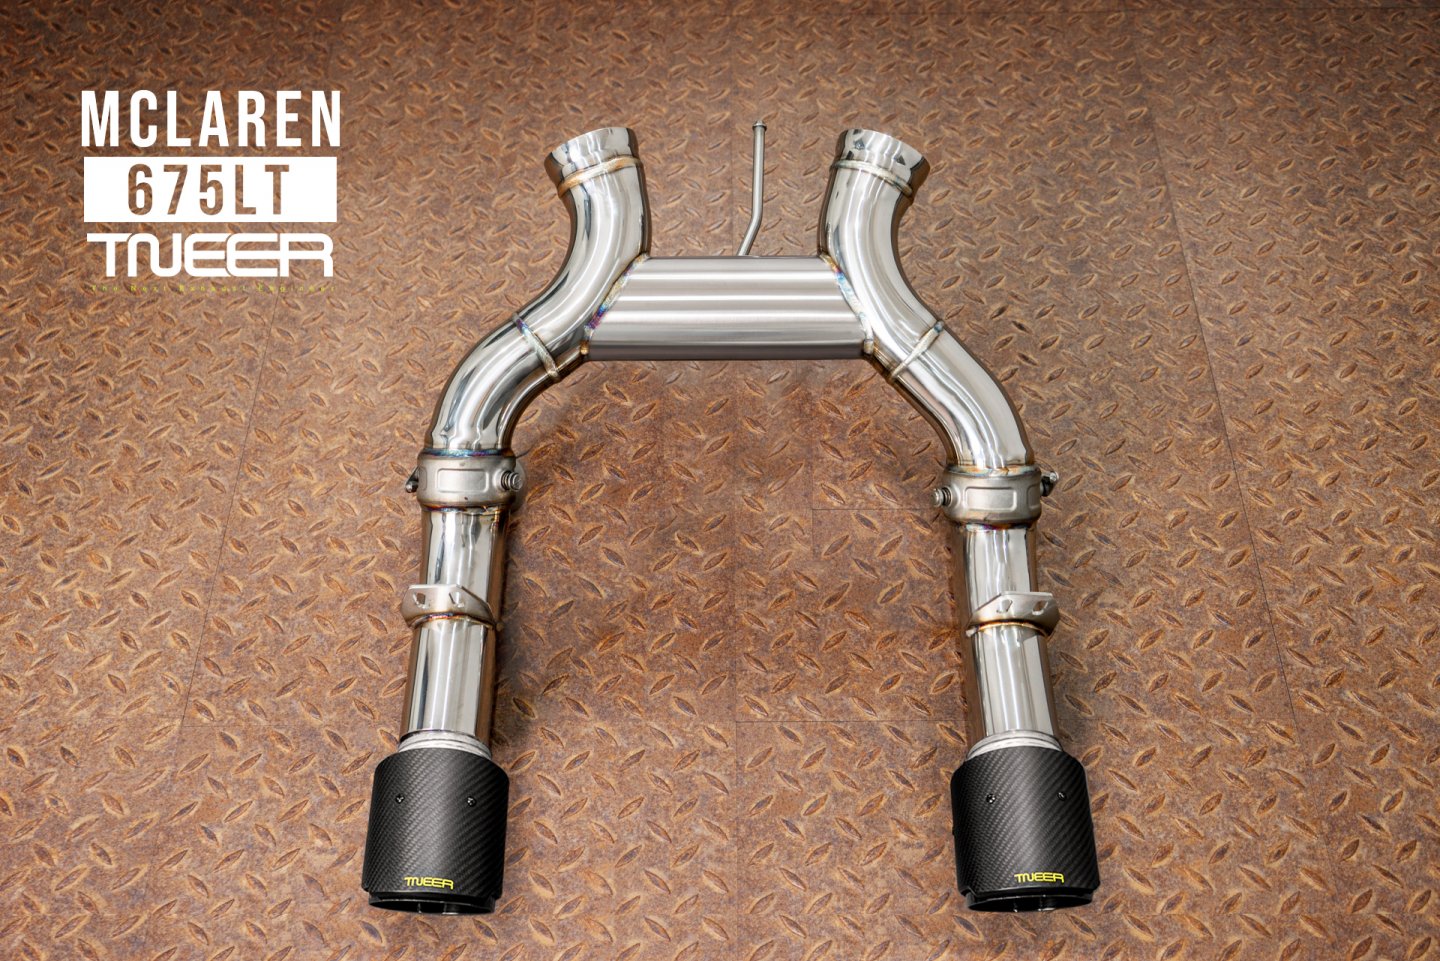 BMW E82 (M135i) TNEER Exhaust System